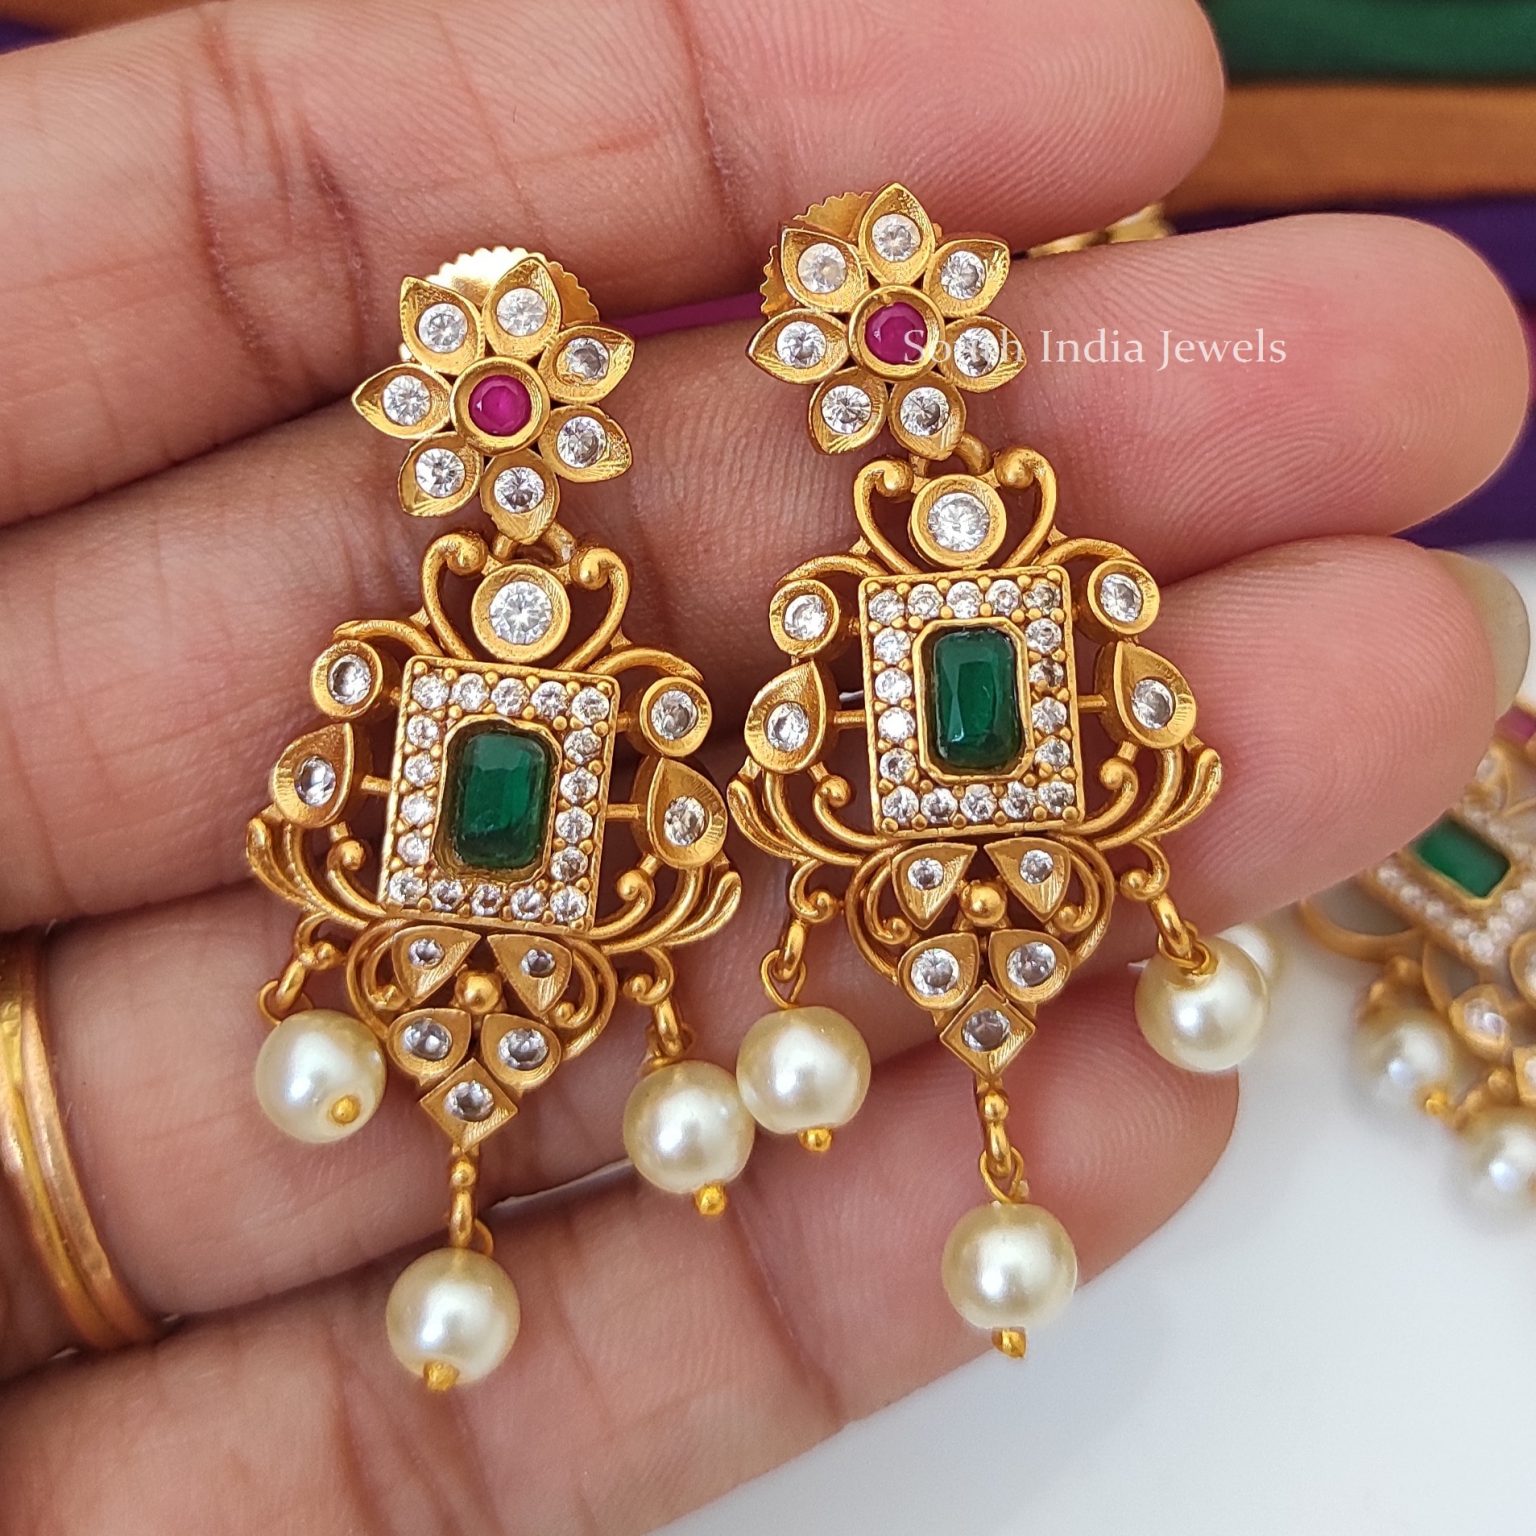 South Indian Ruby & Emerald Necklace - South India Jewels